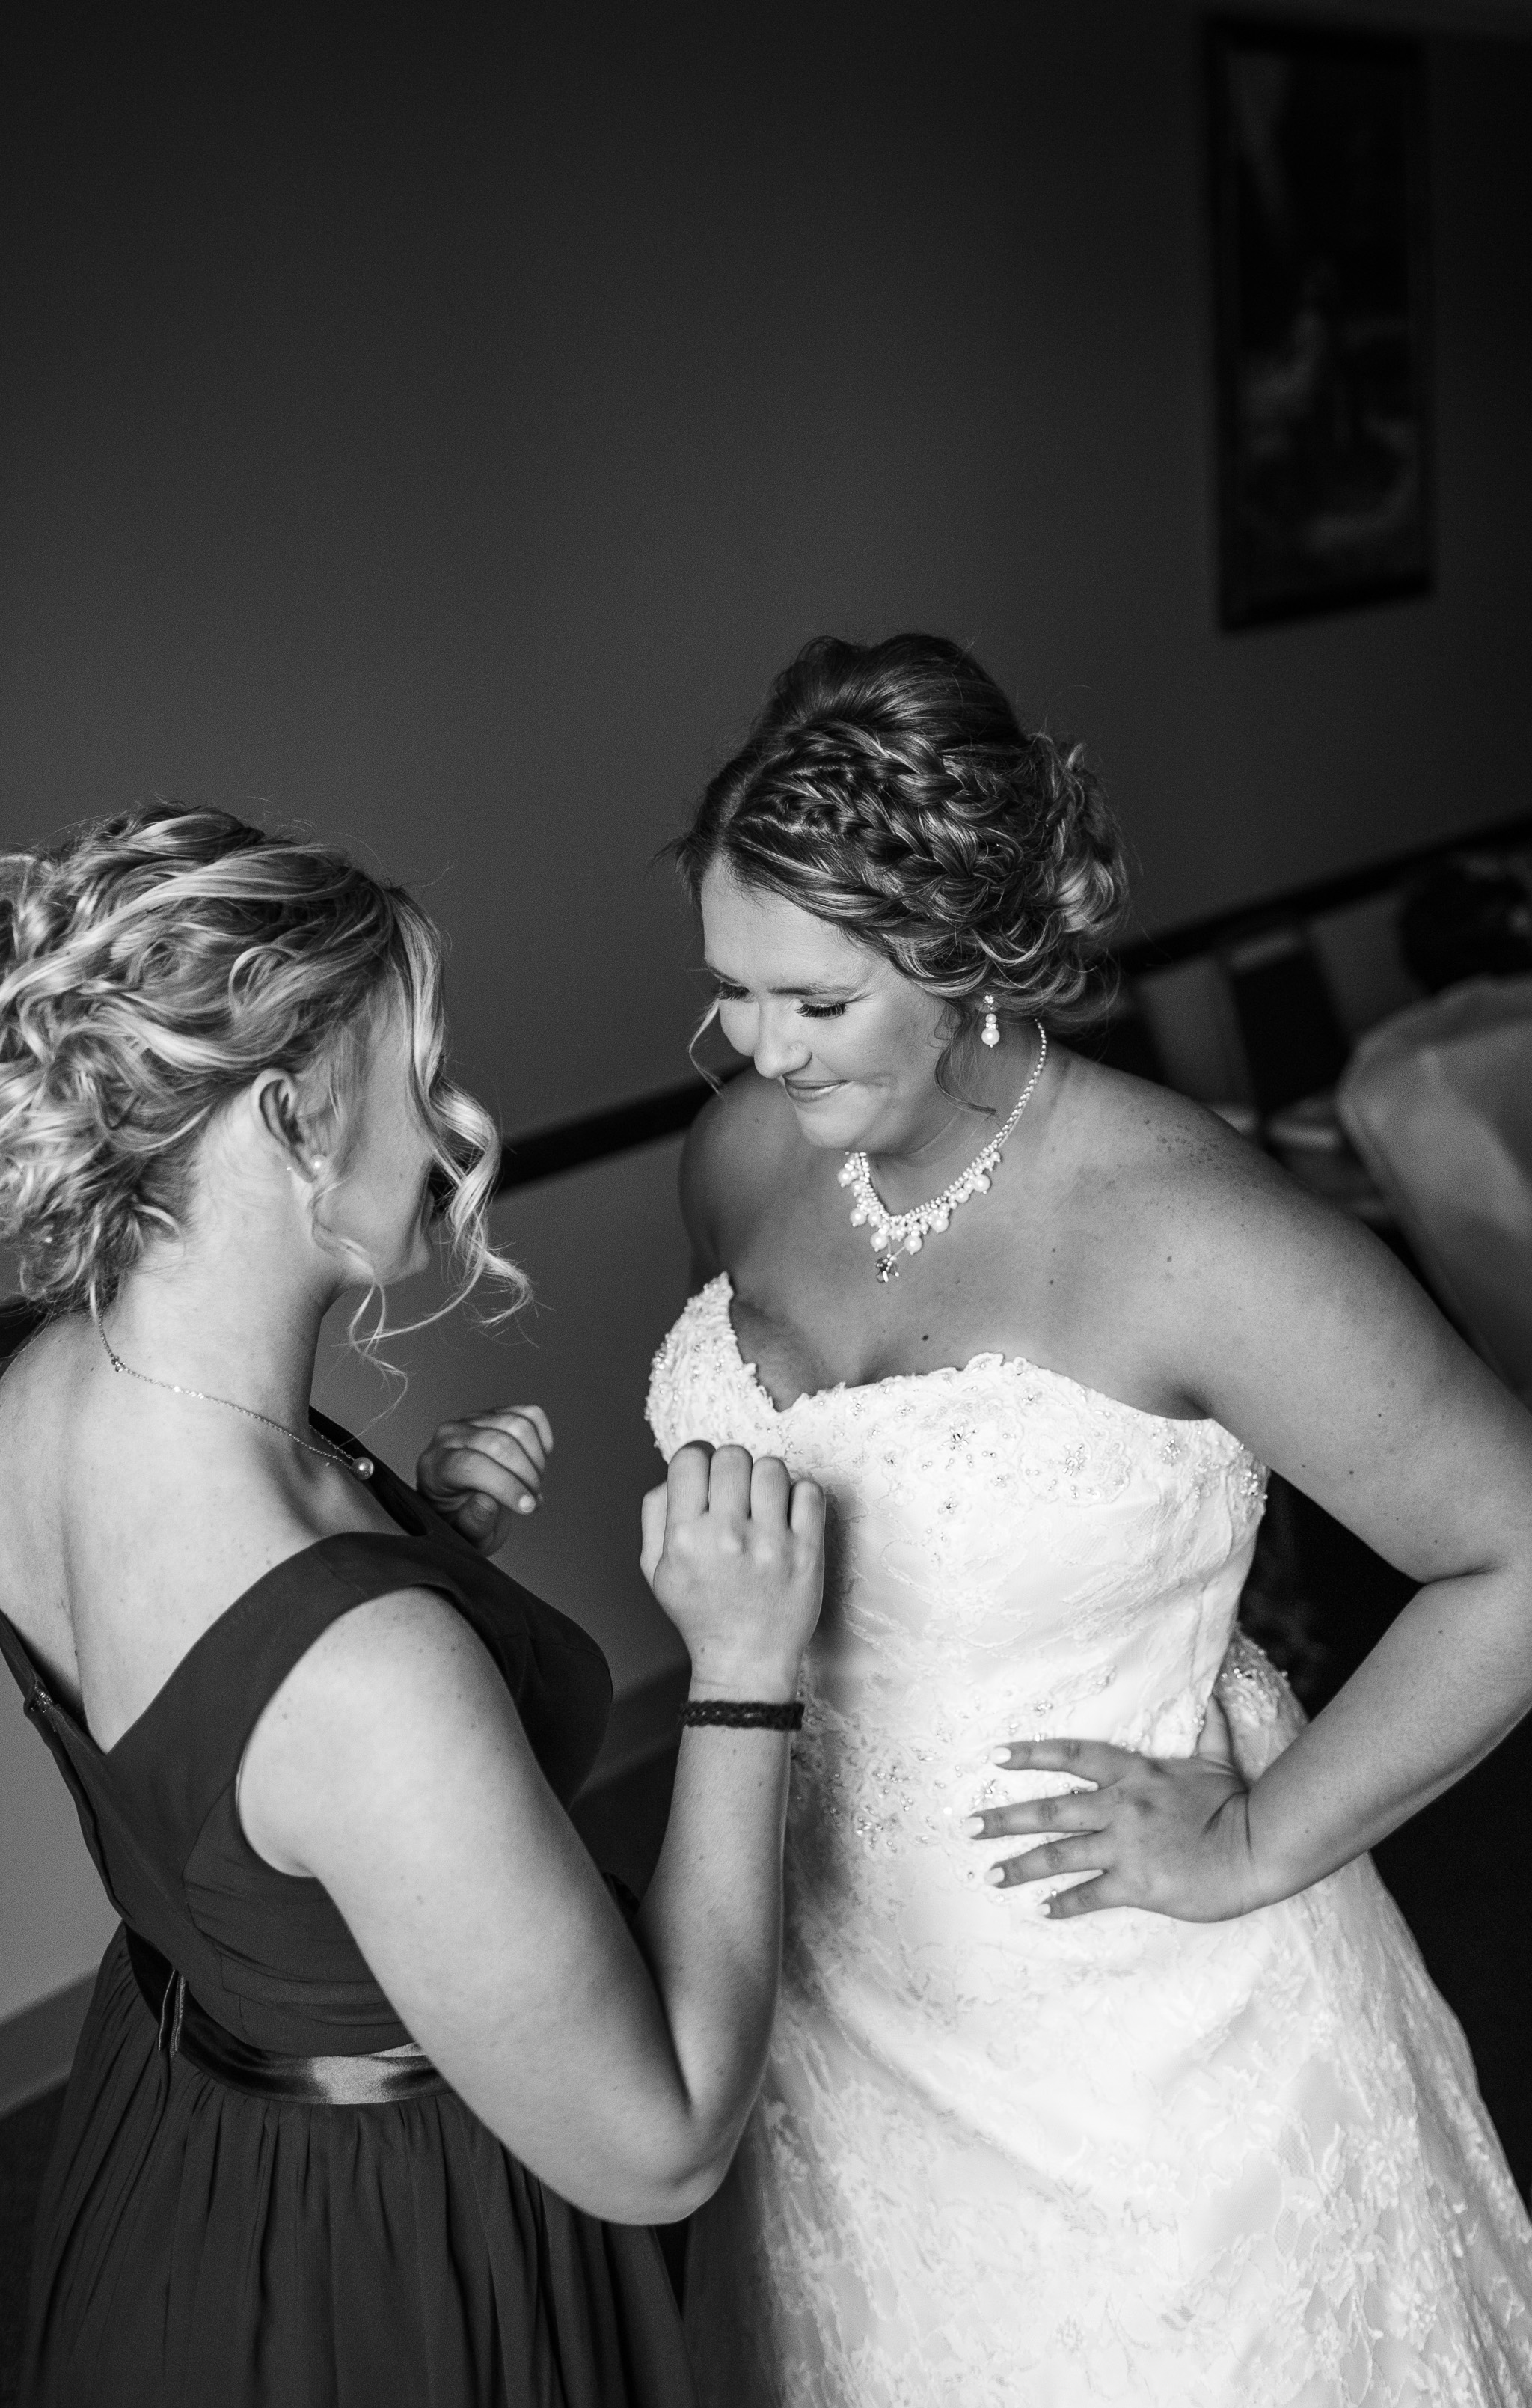 Zibell Spring Wedding, Bride and Groom, Powerful, Connected, Exploration, Laura Duggleby Photography -60.JPG